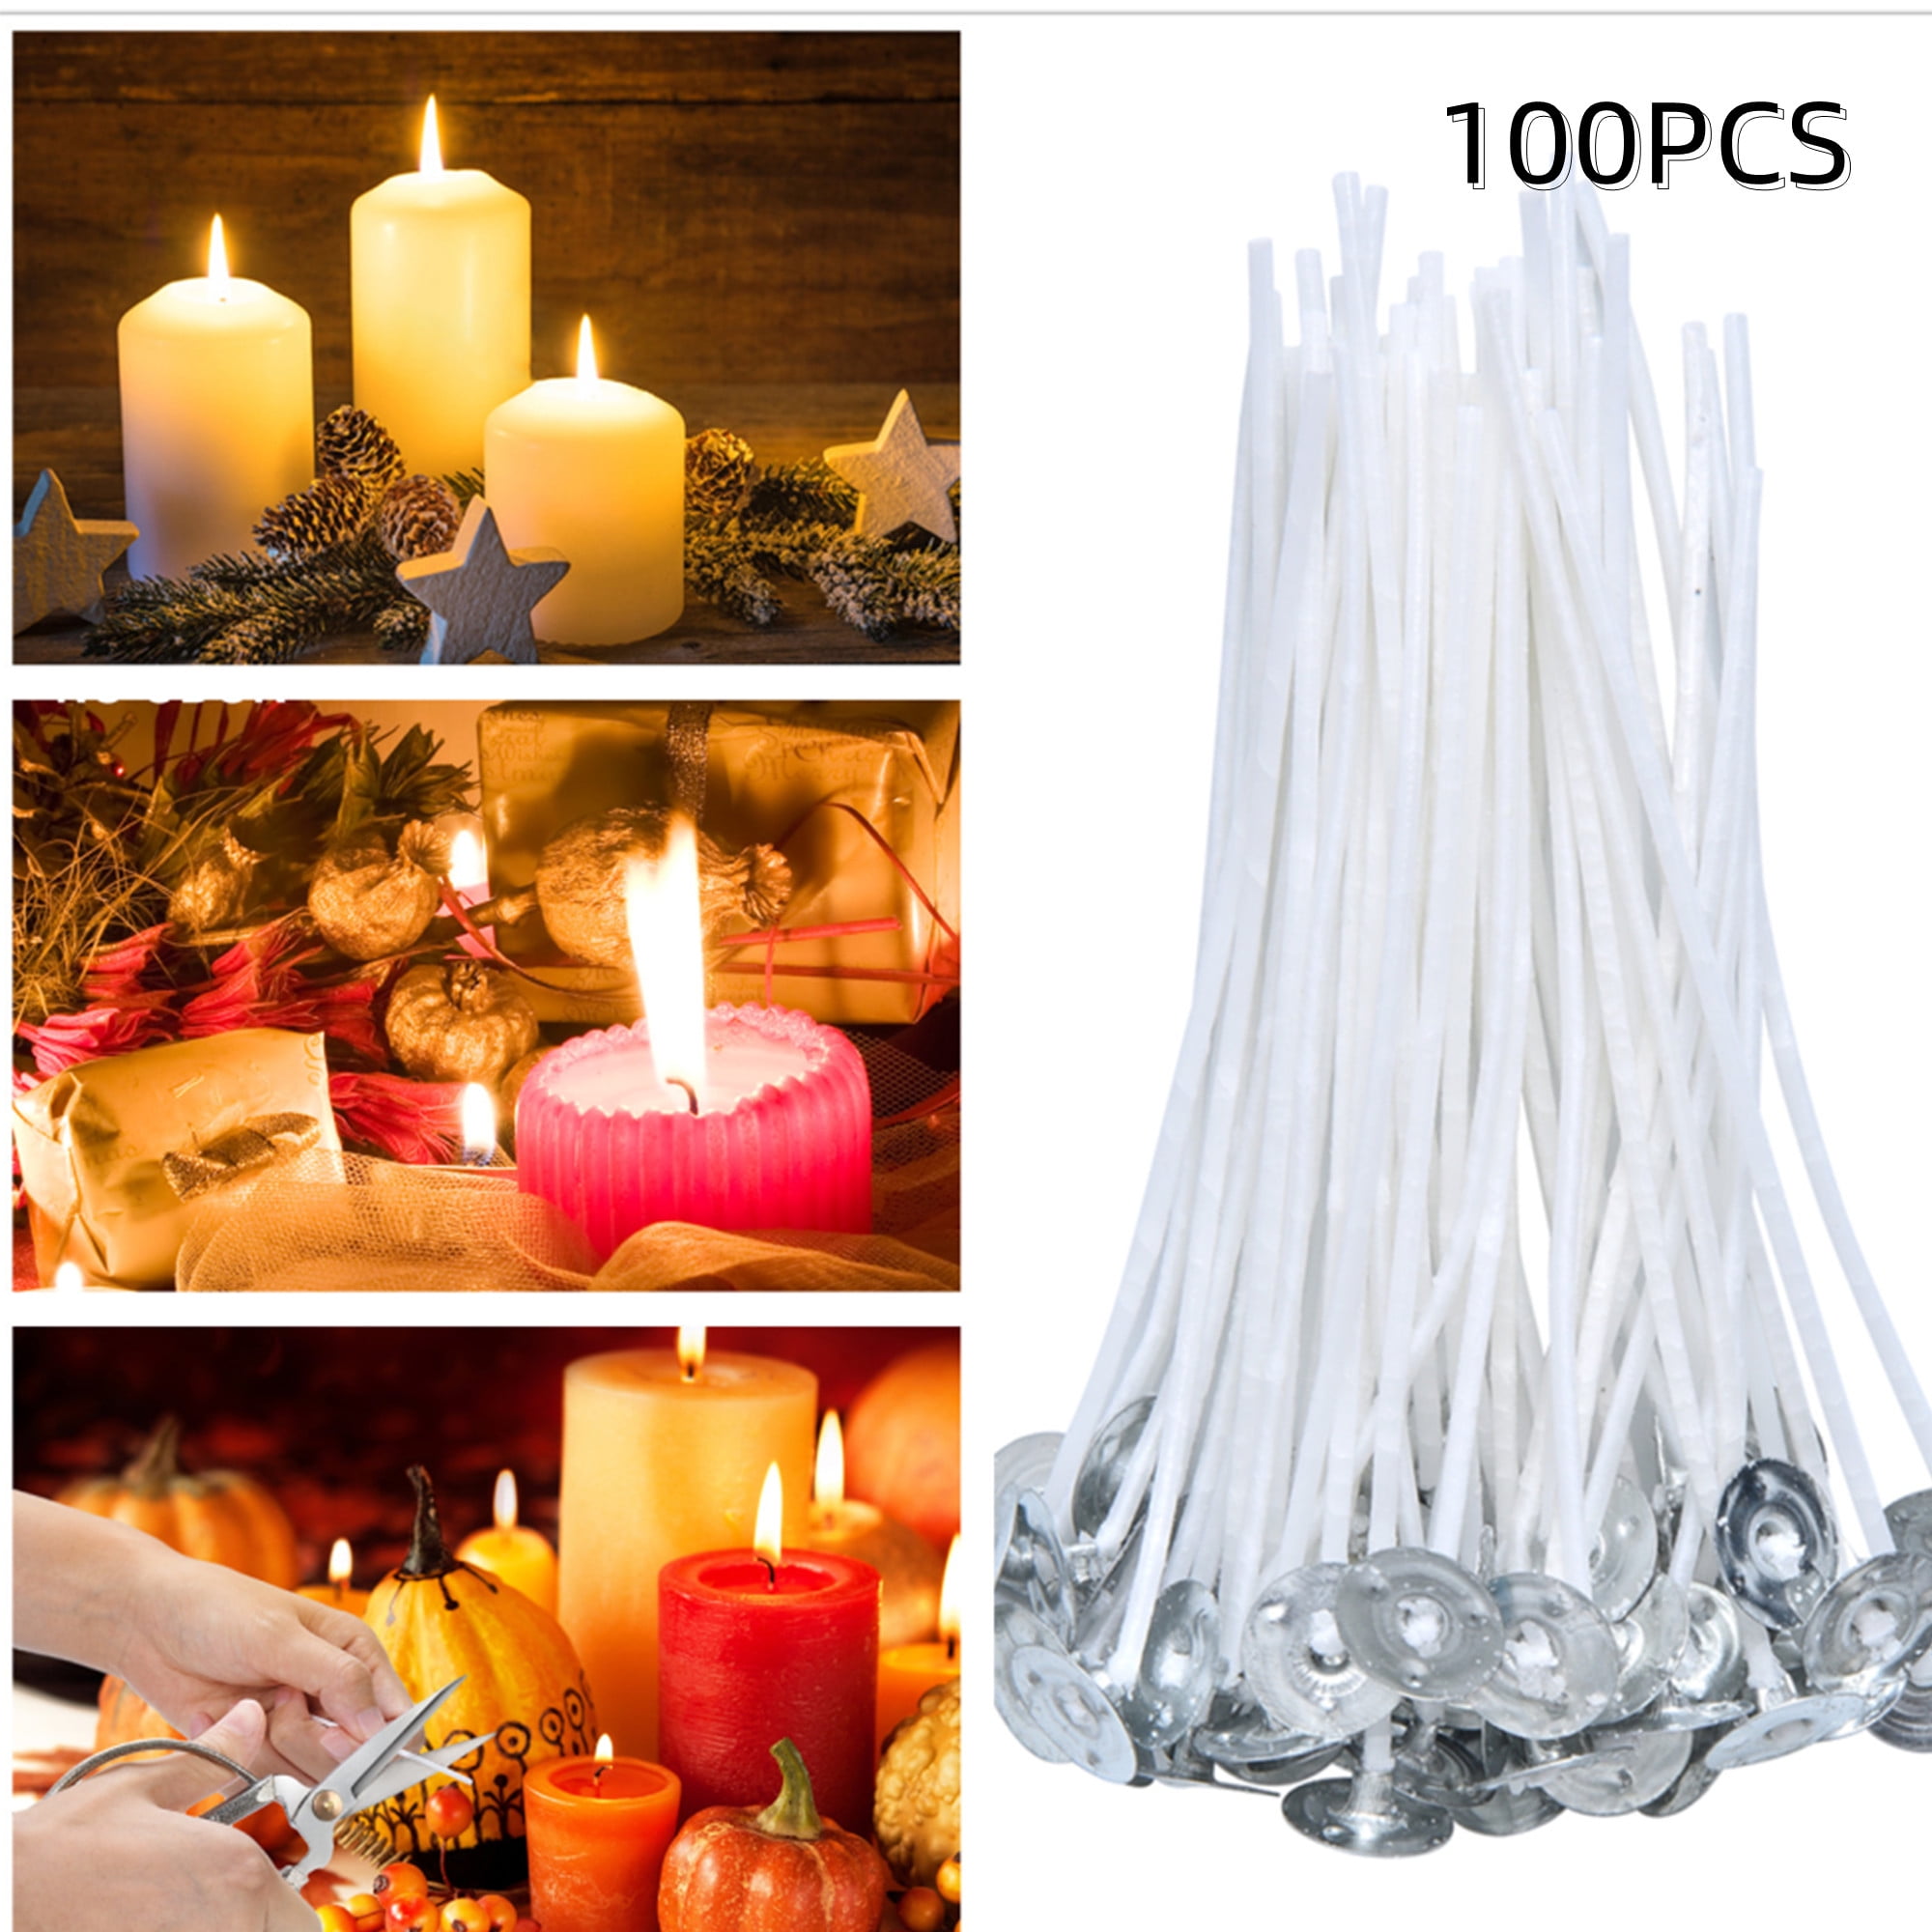 VABNEER 100 Piece Cotton Candle Wick for Candle Making Candle DIY (10cm/4in)